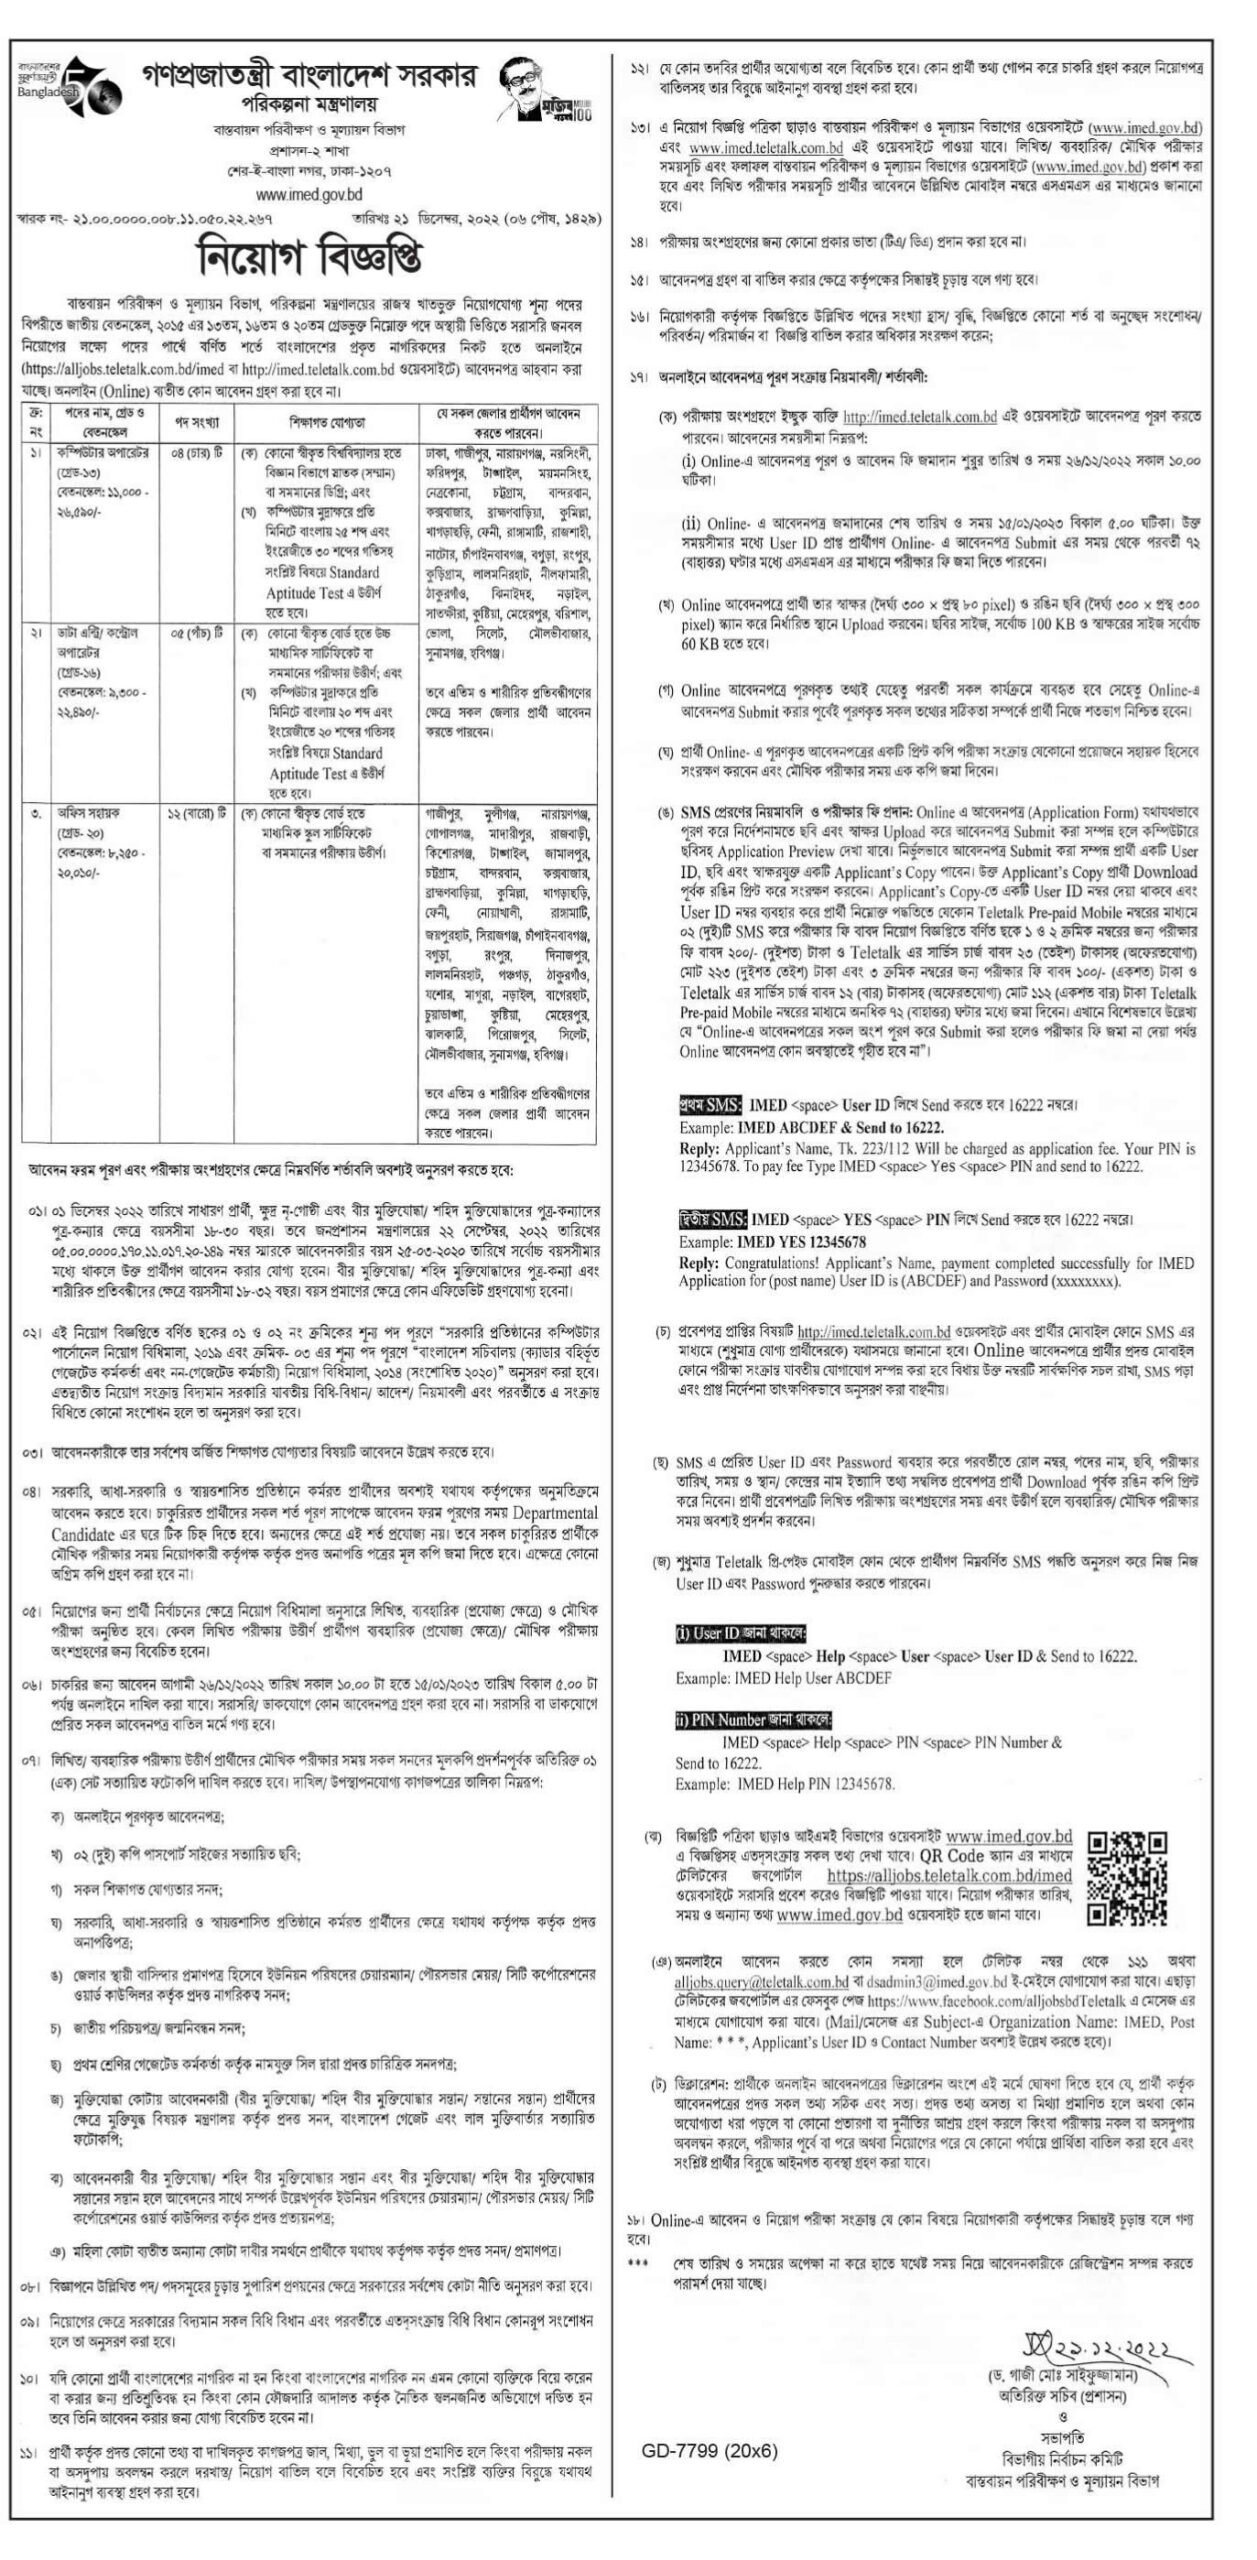 ministry of planning job circular 2023 ministry of planning job circular 2020 ministry of planning job circular 2021 planning ministry job circular 2021 planning ministry job circular